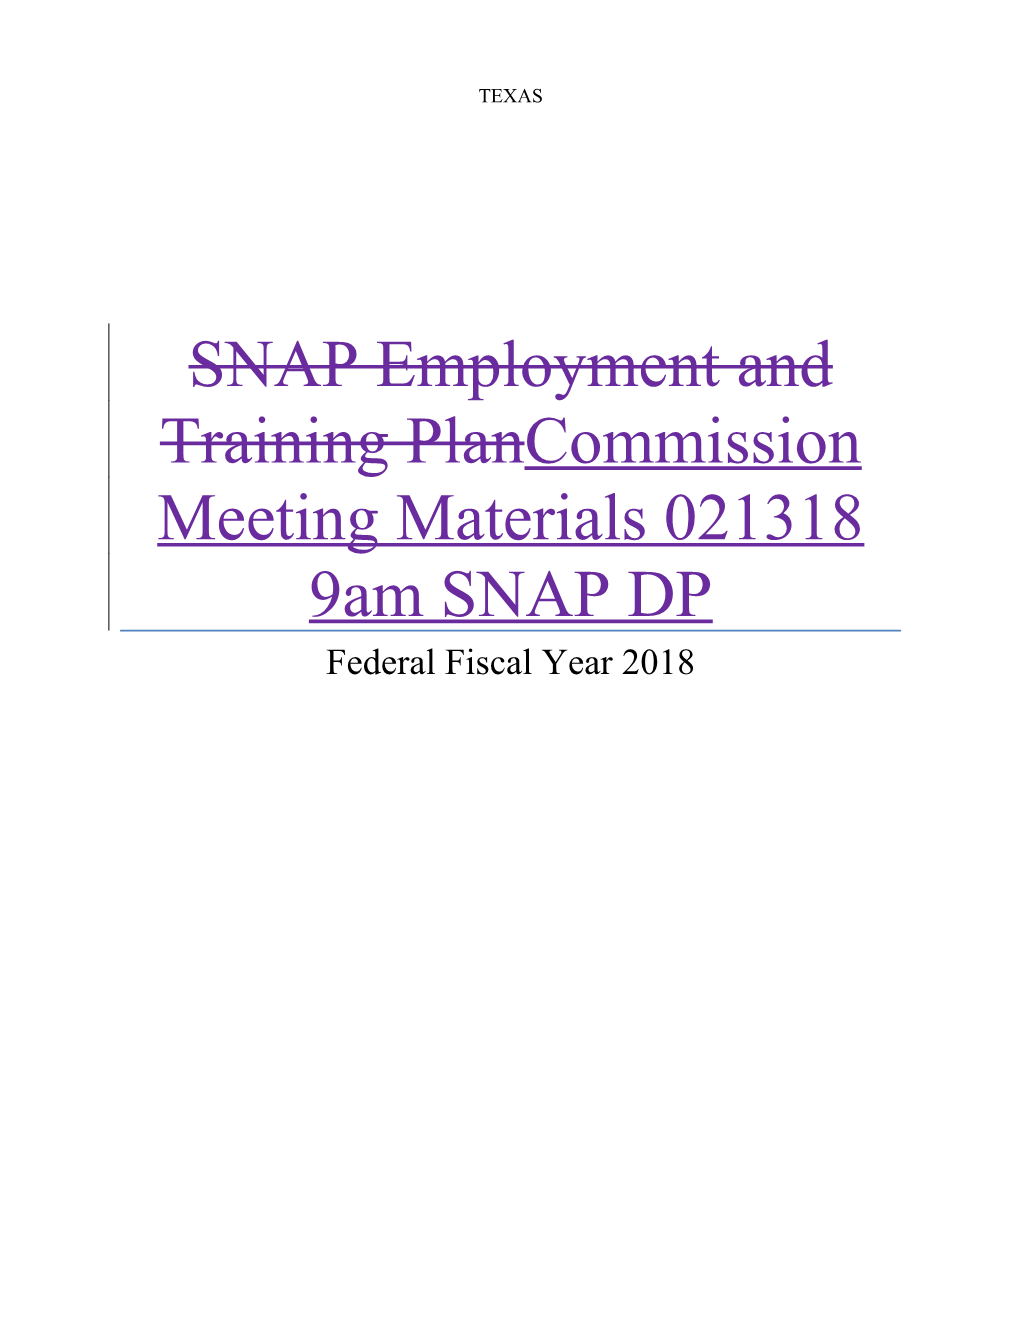 Commission Meeting Materials 021318 9Am SNAP DP